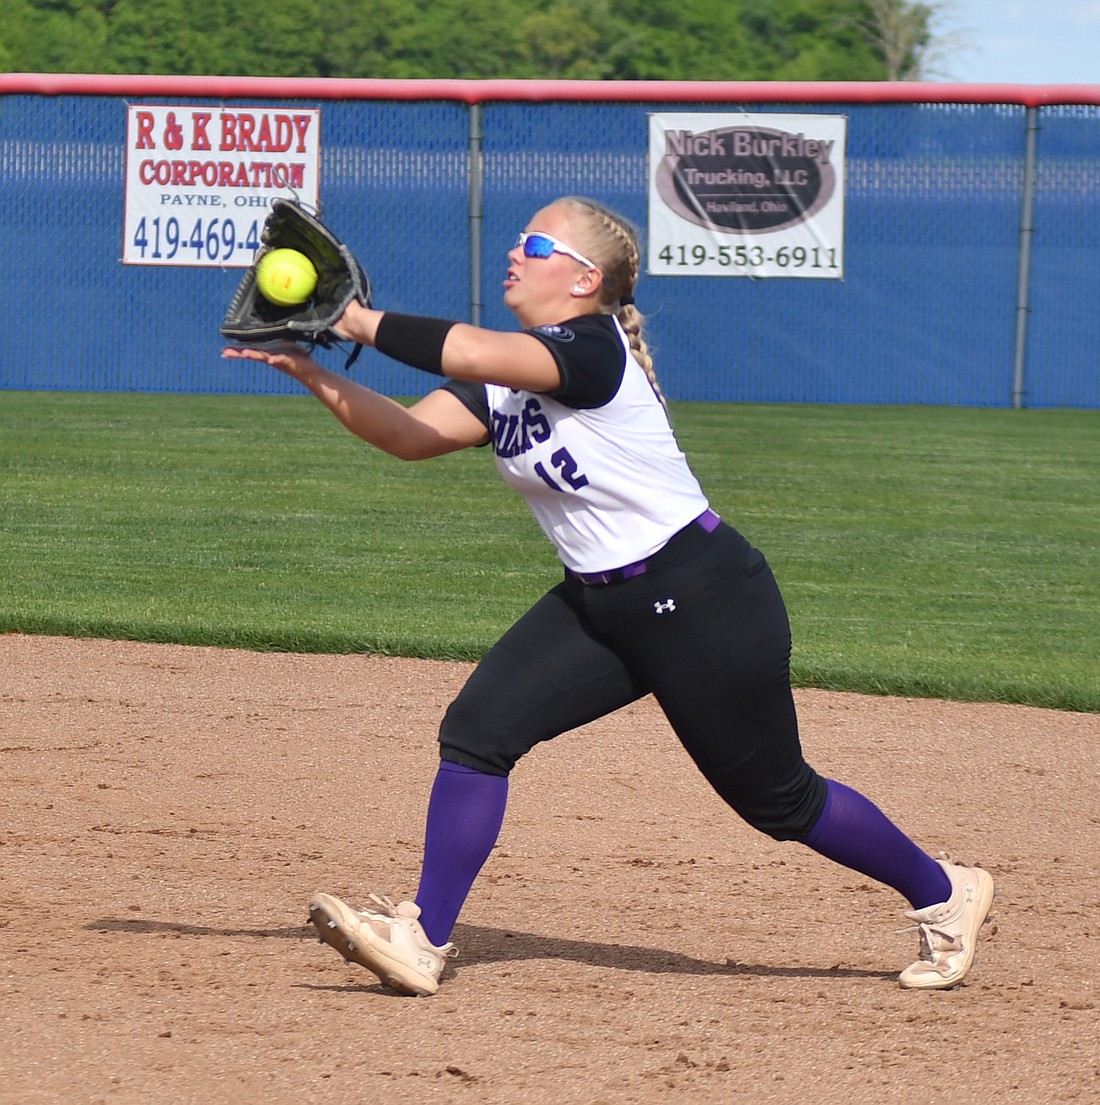 Ava Grisez, a junior at Fort Recovery High School, catches a line drive to record the second out of a potentially dangerous inning for the Indians during the Division III sectional championship on Friday night. Grisez played a large role in an offensive explosion late in the game that led the Indians to a 10-2 sectional title over the Wayne Trace Raiders. (The Commercial Review/Andrew Balko)